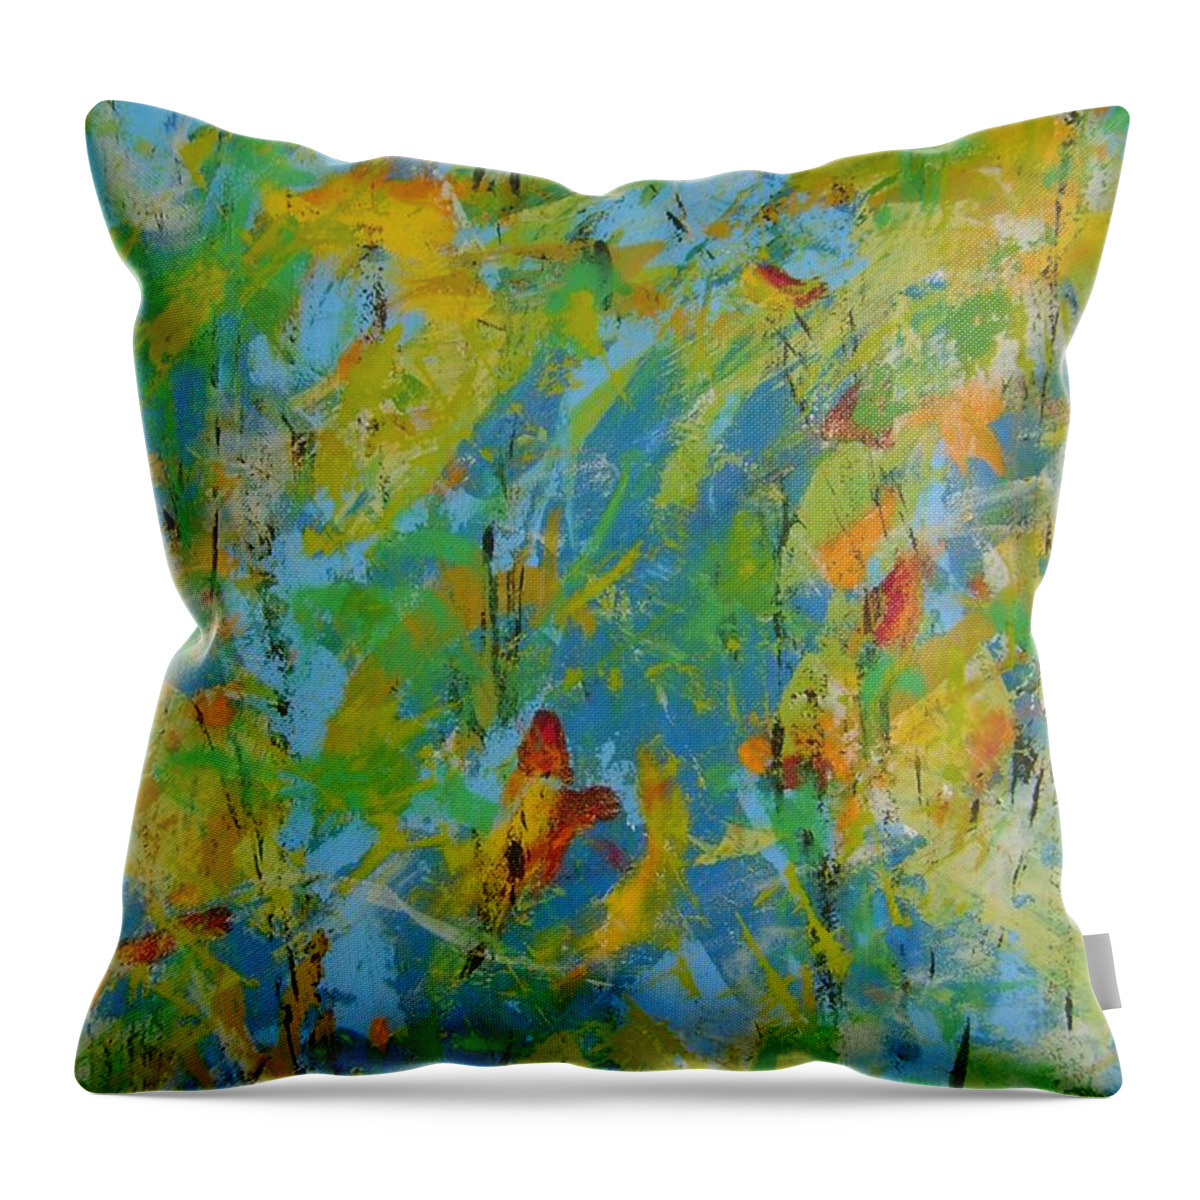 Fleeting Colors Of Autumn #3-8119 Throw Pillow featuring the painting Fleeting Colors of Autumn #3-8119 by Therese Legere